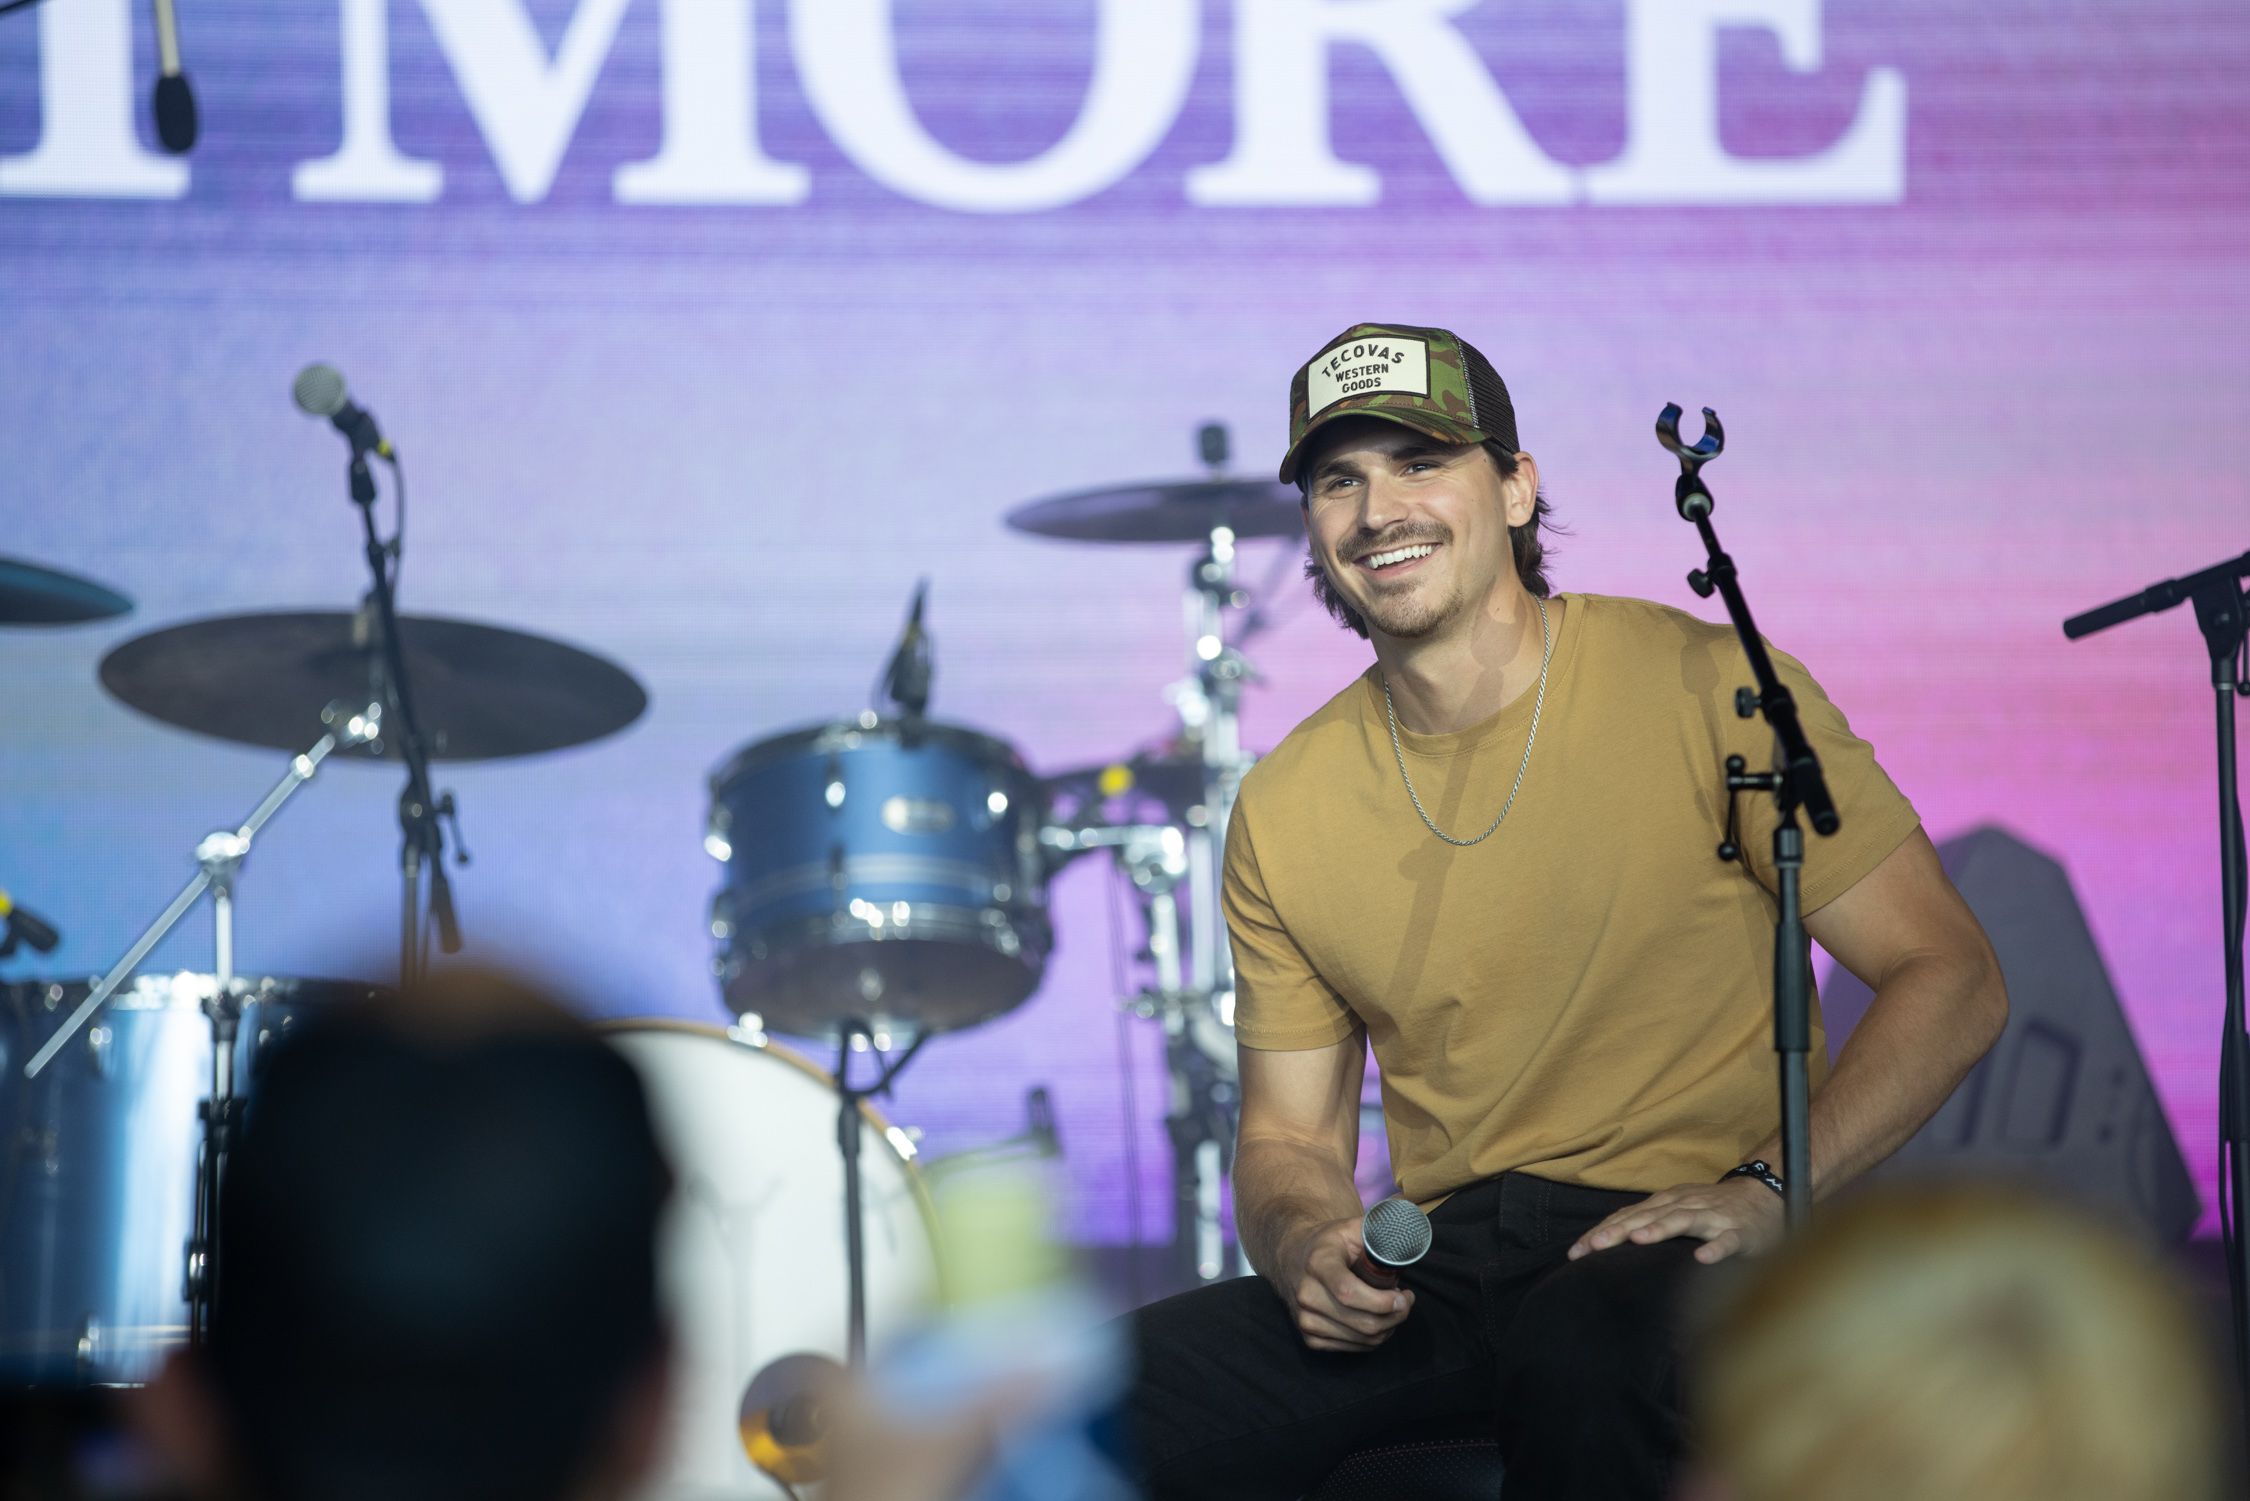 NEW UMG ARTIST TUCKER WETMORE KICKS OFF THE UMG NASHVILLE TAKEOVER FOUR DAY EVENT FEATURING MULTIPLE ARTIST PERFORMANCES, FAN CLUB PARTIES, ARTIST SIGNINGS AND MORE